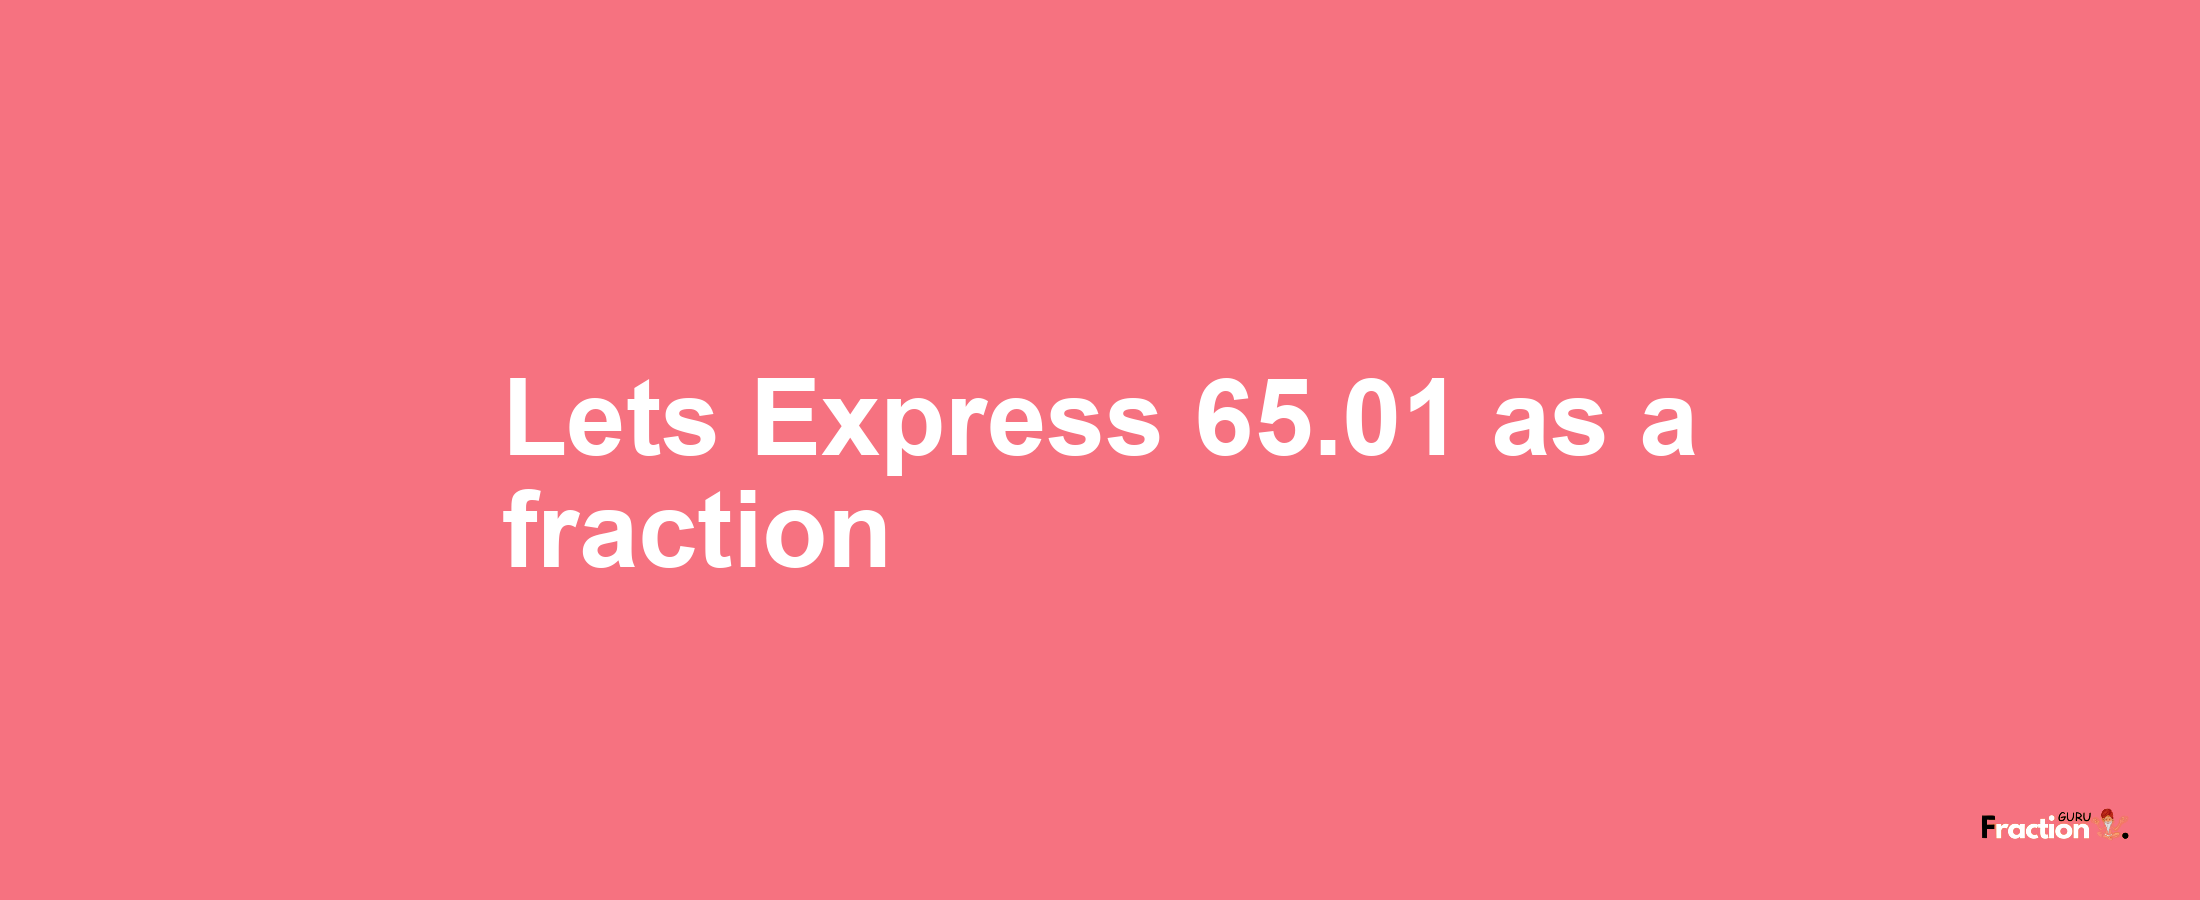 Lets Express 65.01 as afraction